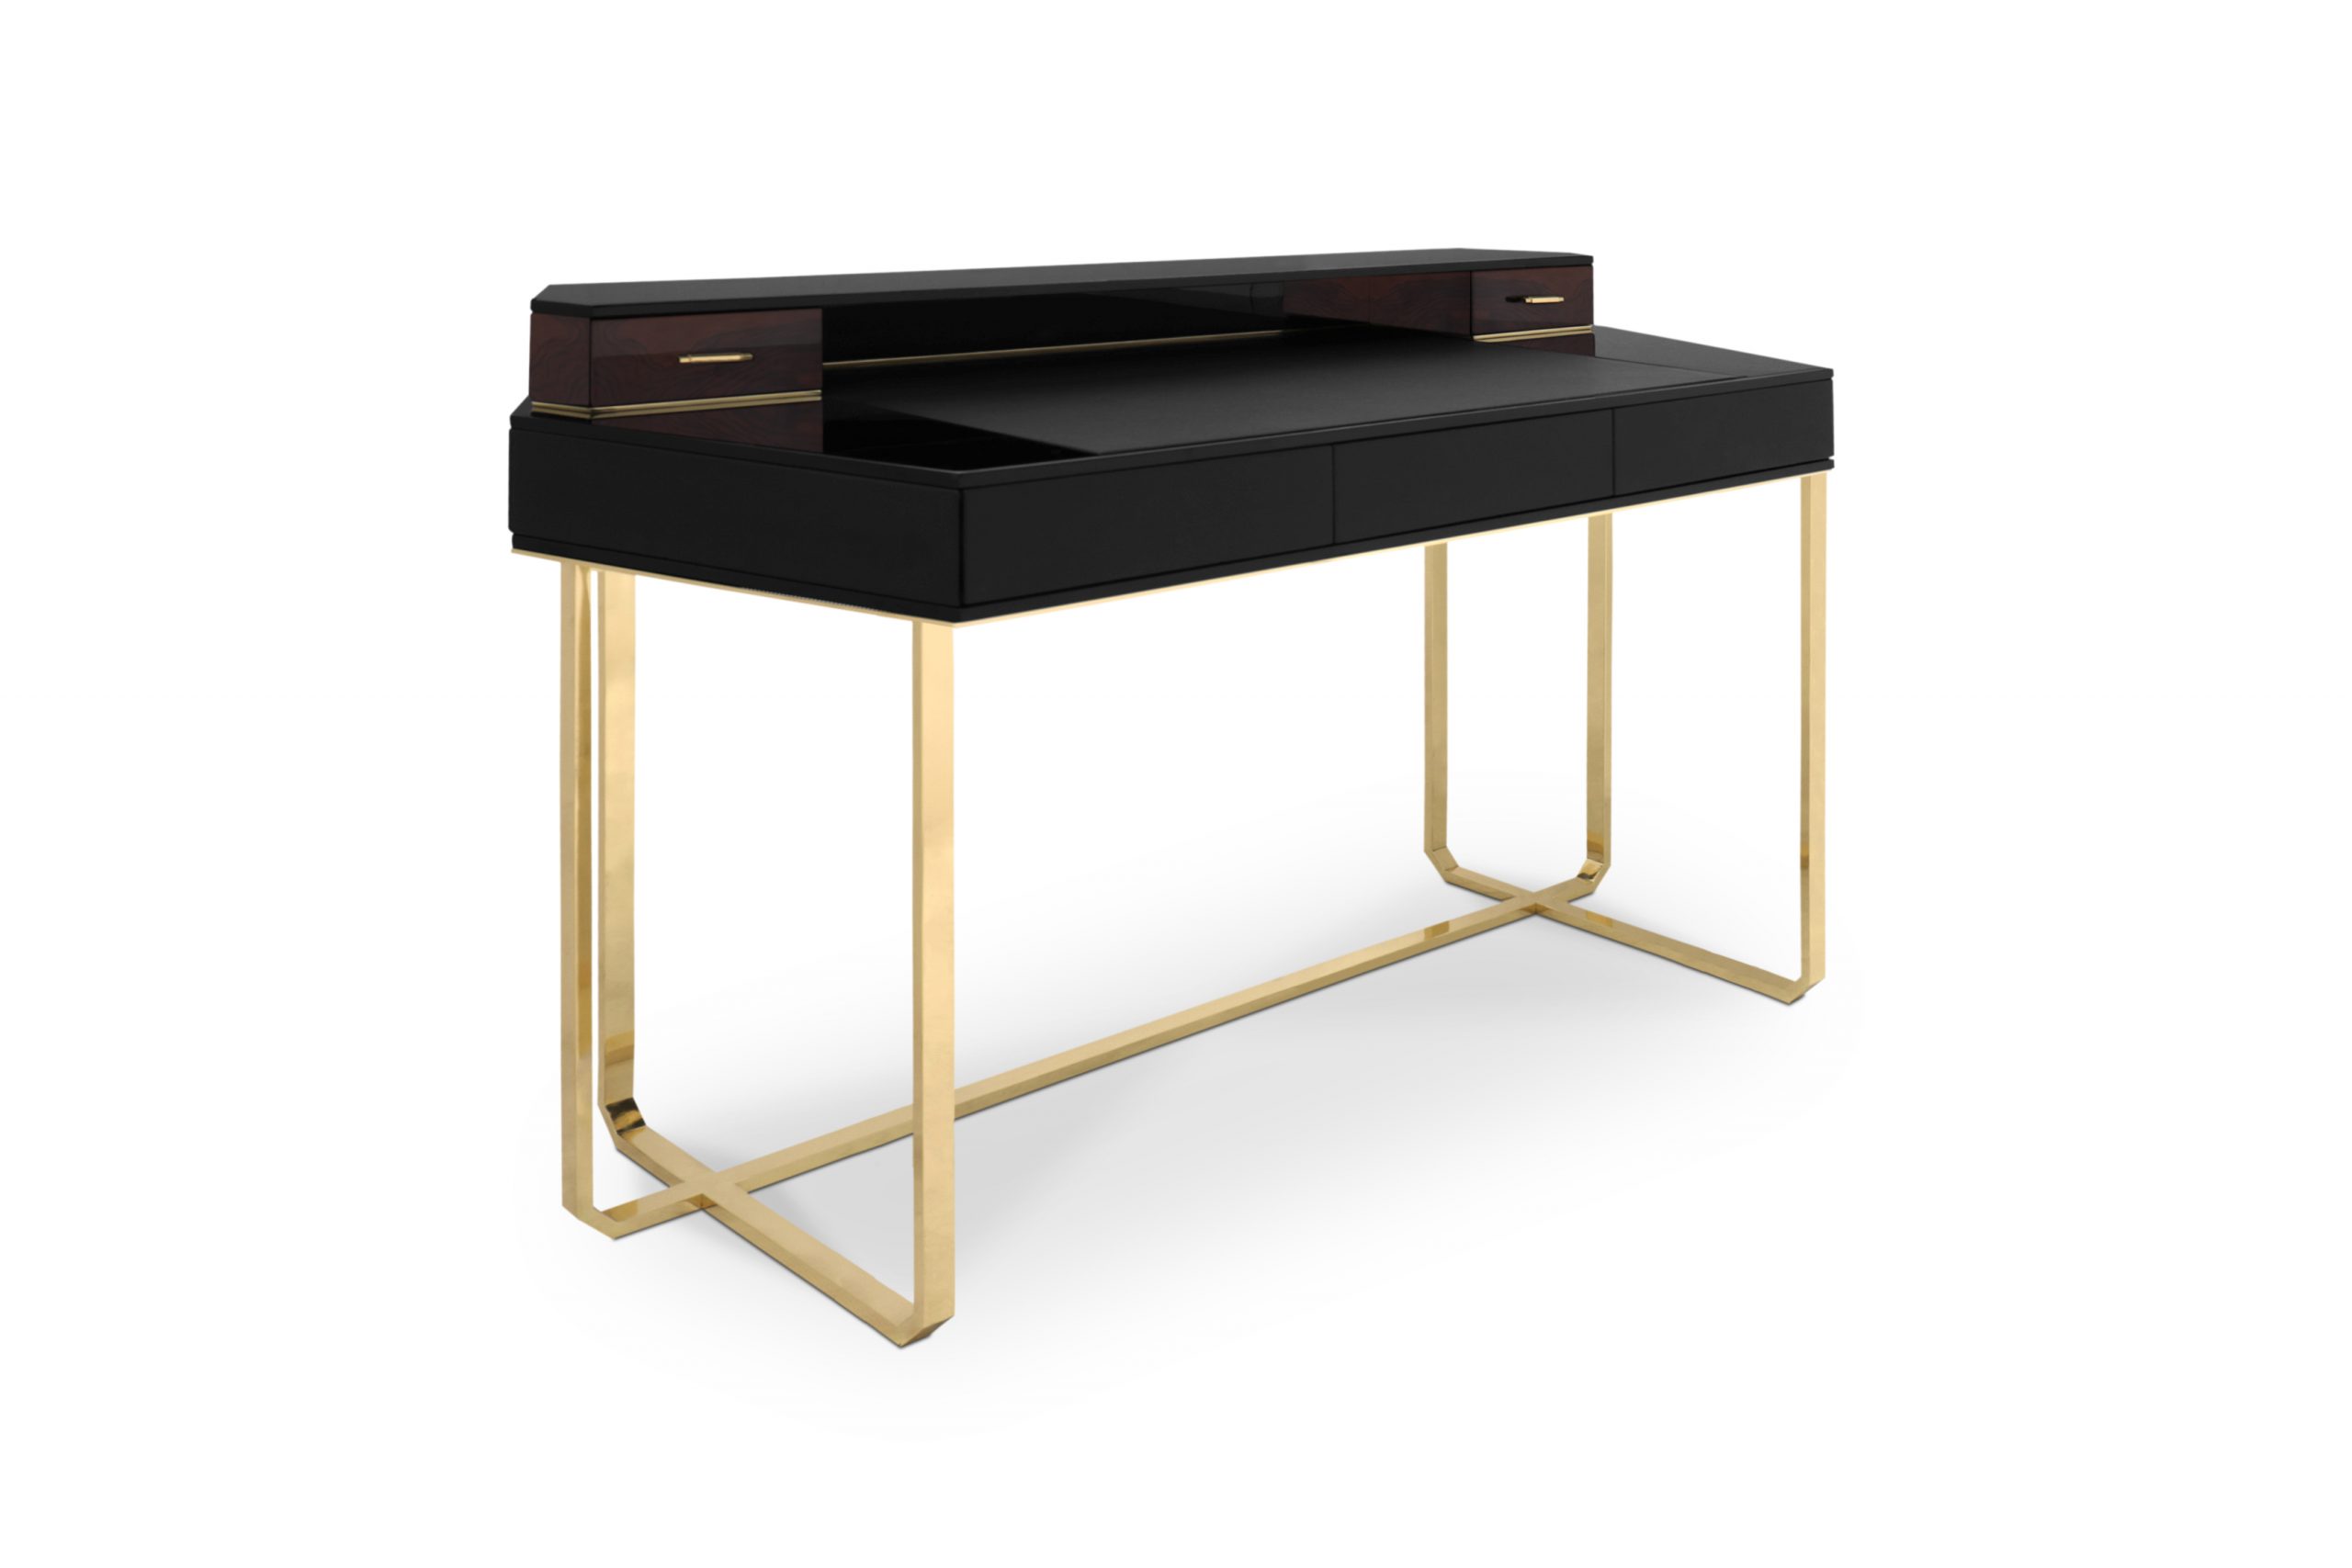 15 Modern Desks to Revamp Your Home Office